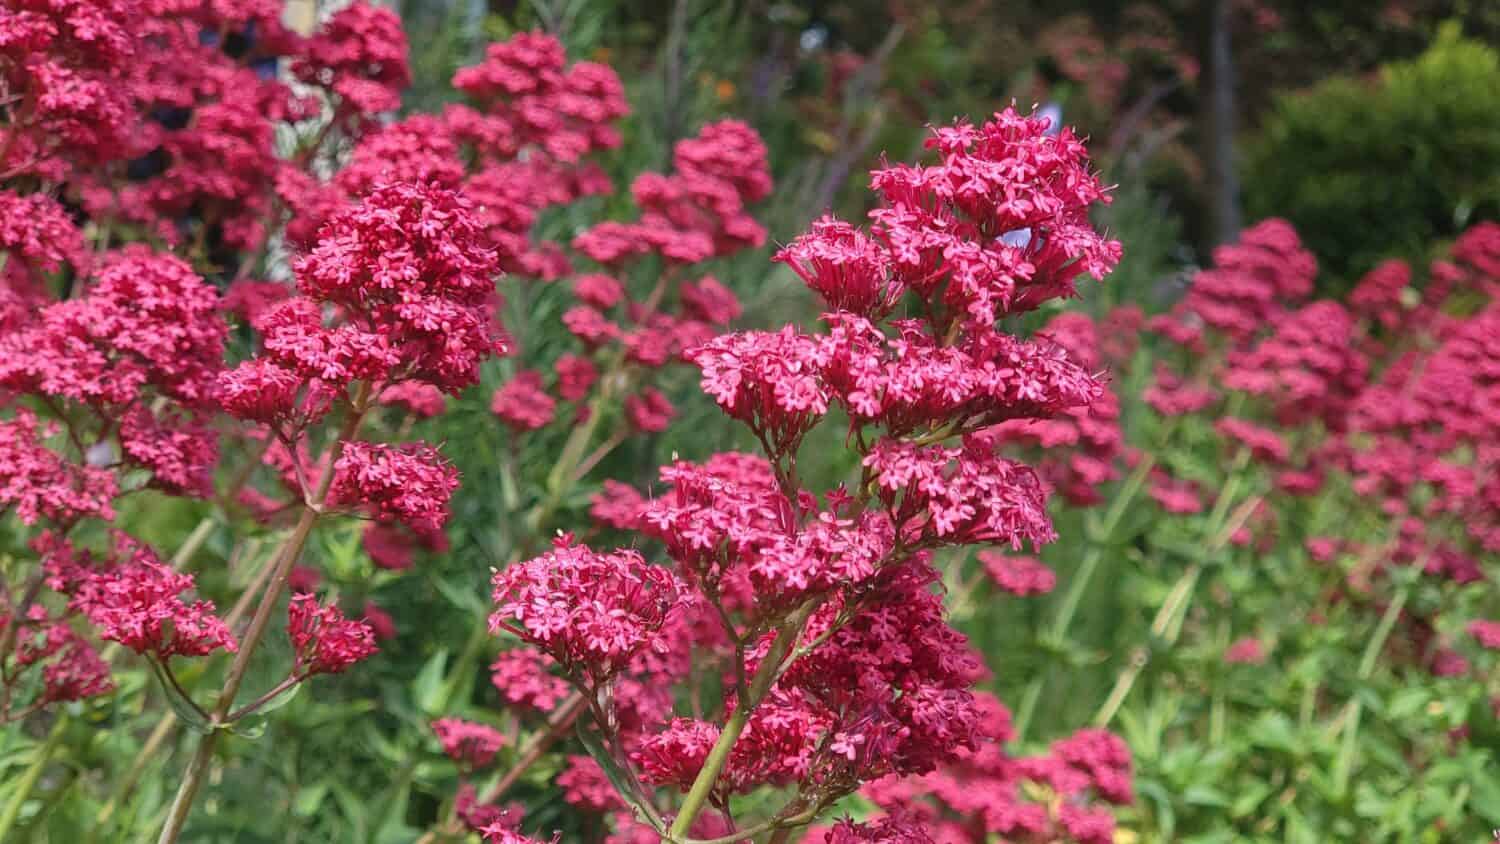 A selective focus of red valerian (Centranthus ruber) flowers in a garden